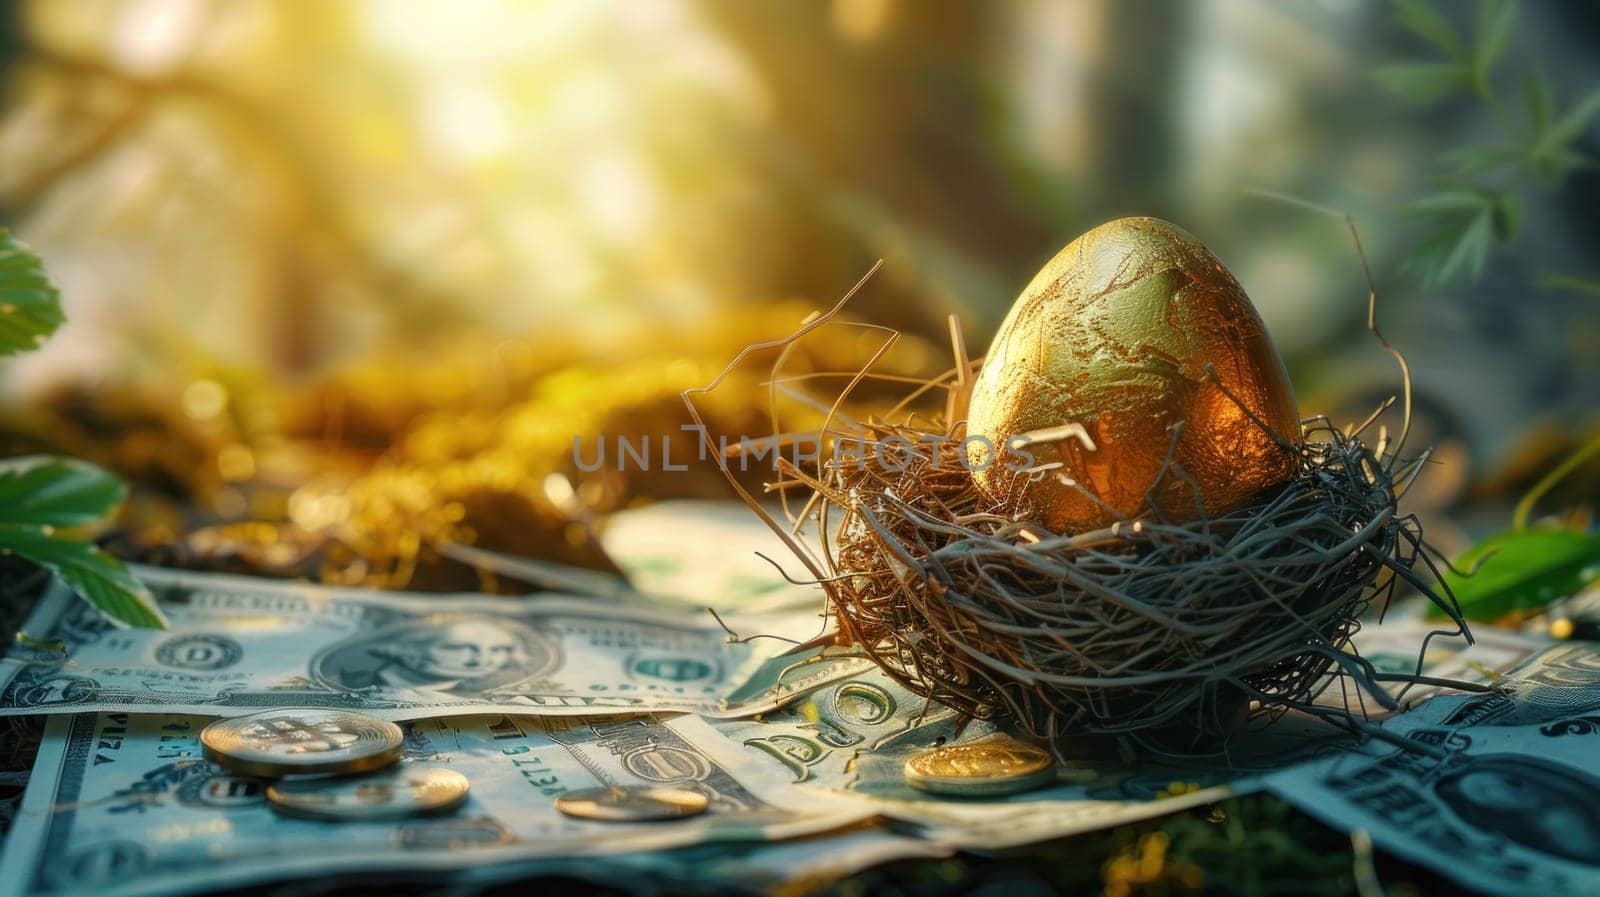 A nest of twigs and a gold egg on top of a pile of money. The nest is surrounded by a few coins and a few dollar bills. Concept of wealth and abundance, as the gold egg